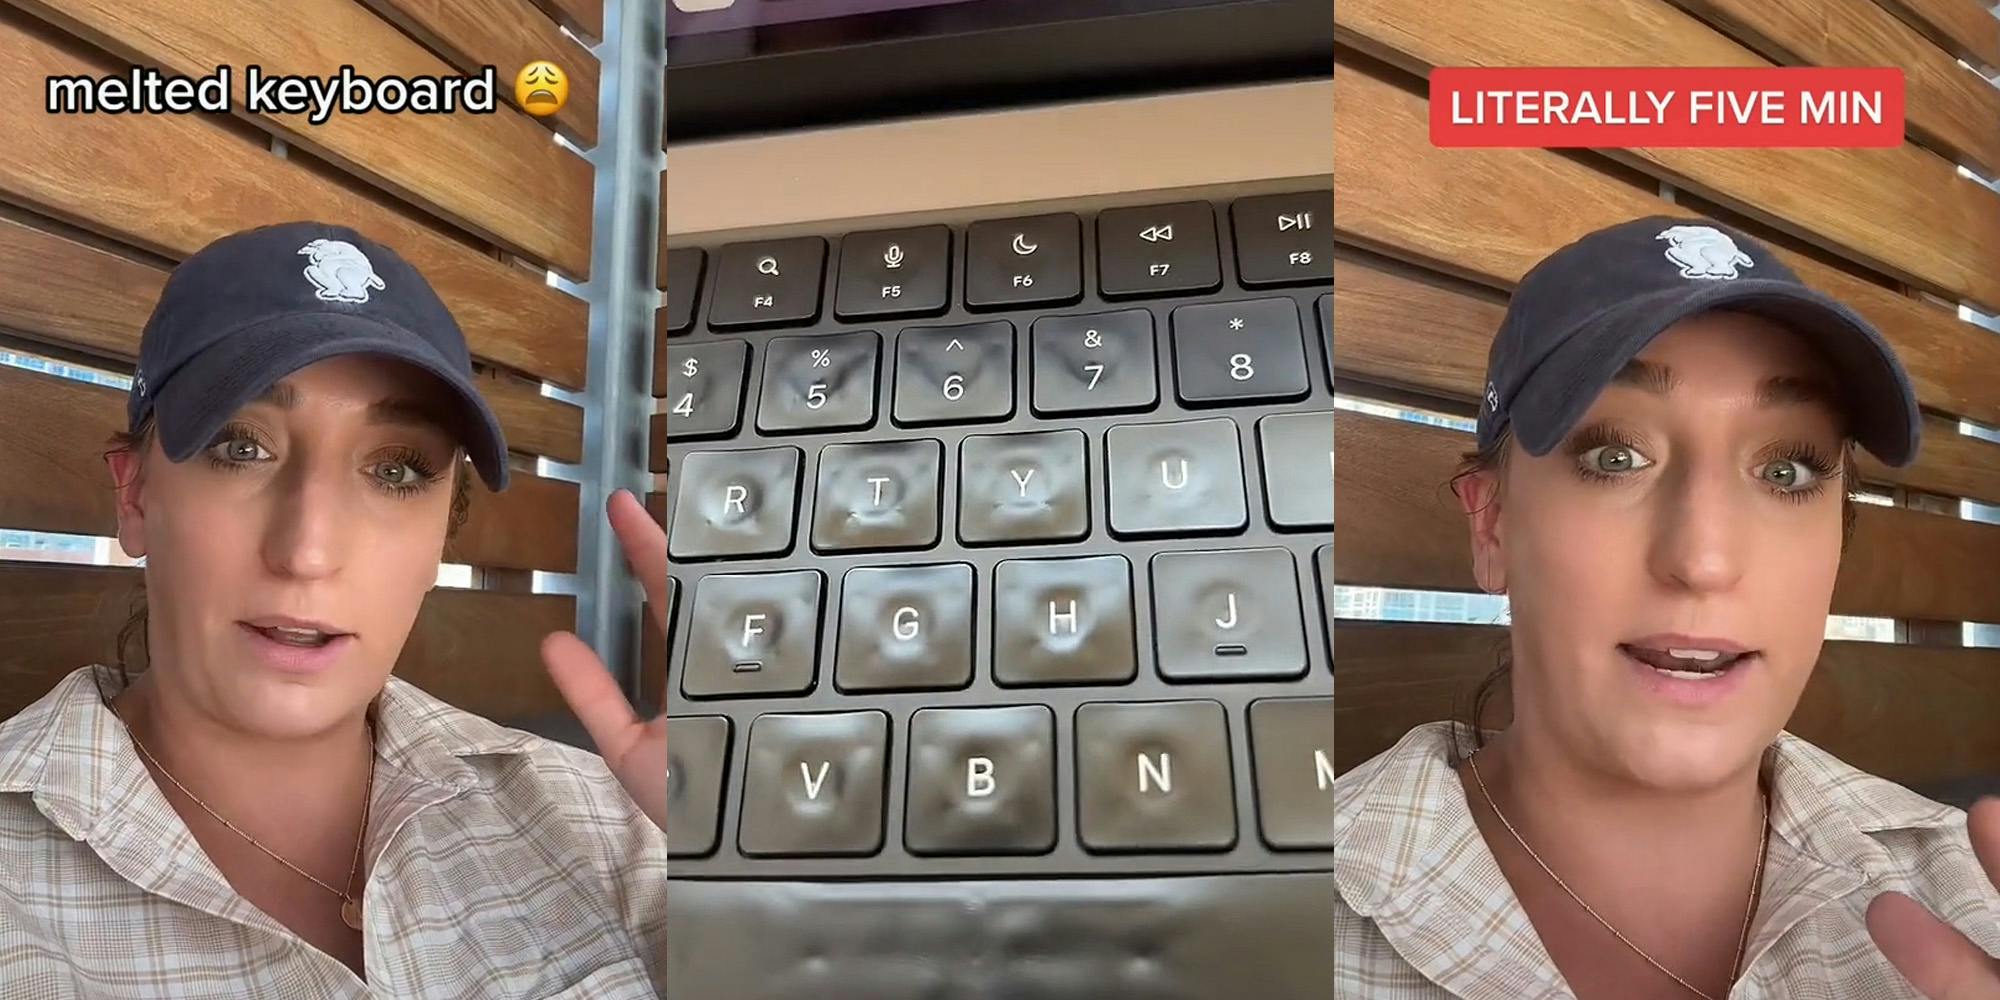 person speaking caption "melted keyboard" (l) warped melted keyboard (c) person talking caption "LITERALLY FIVE MIN" (r)